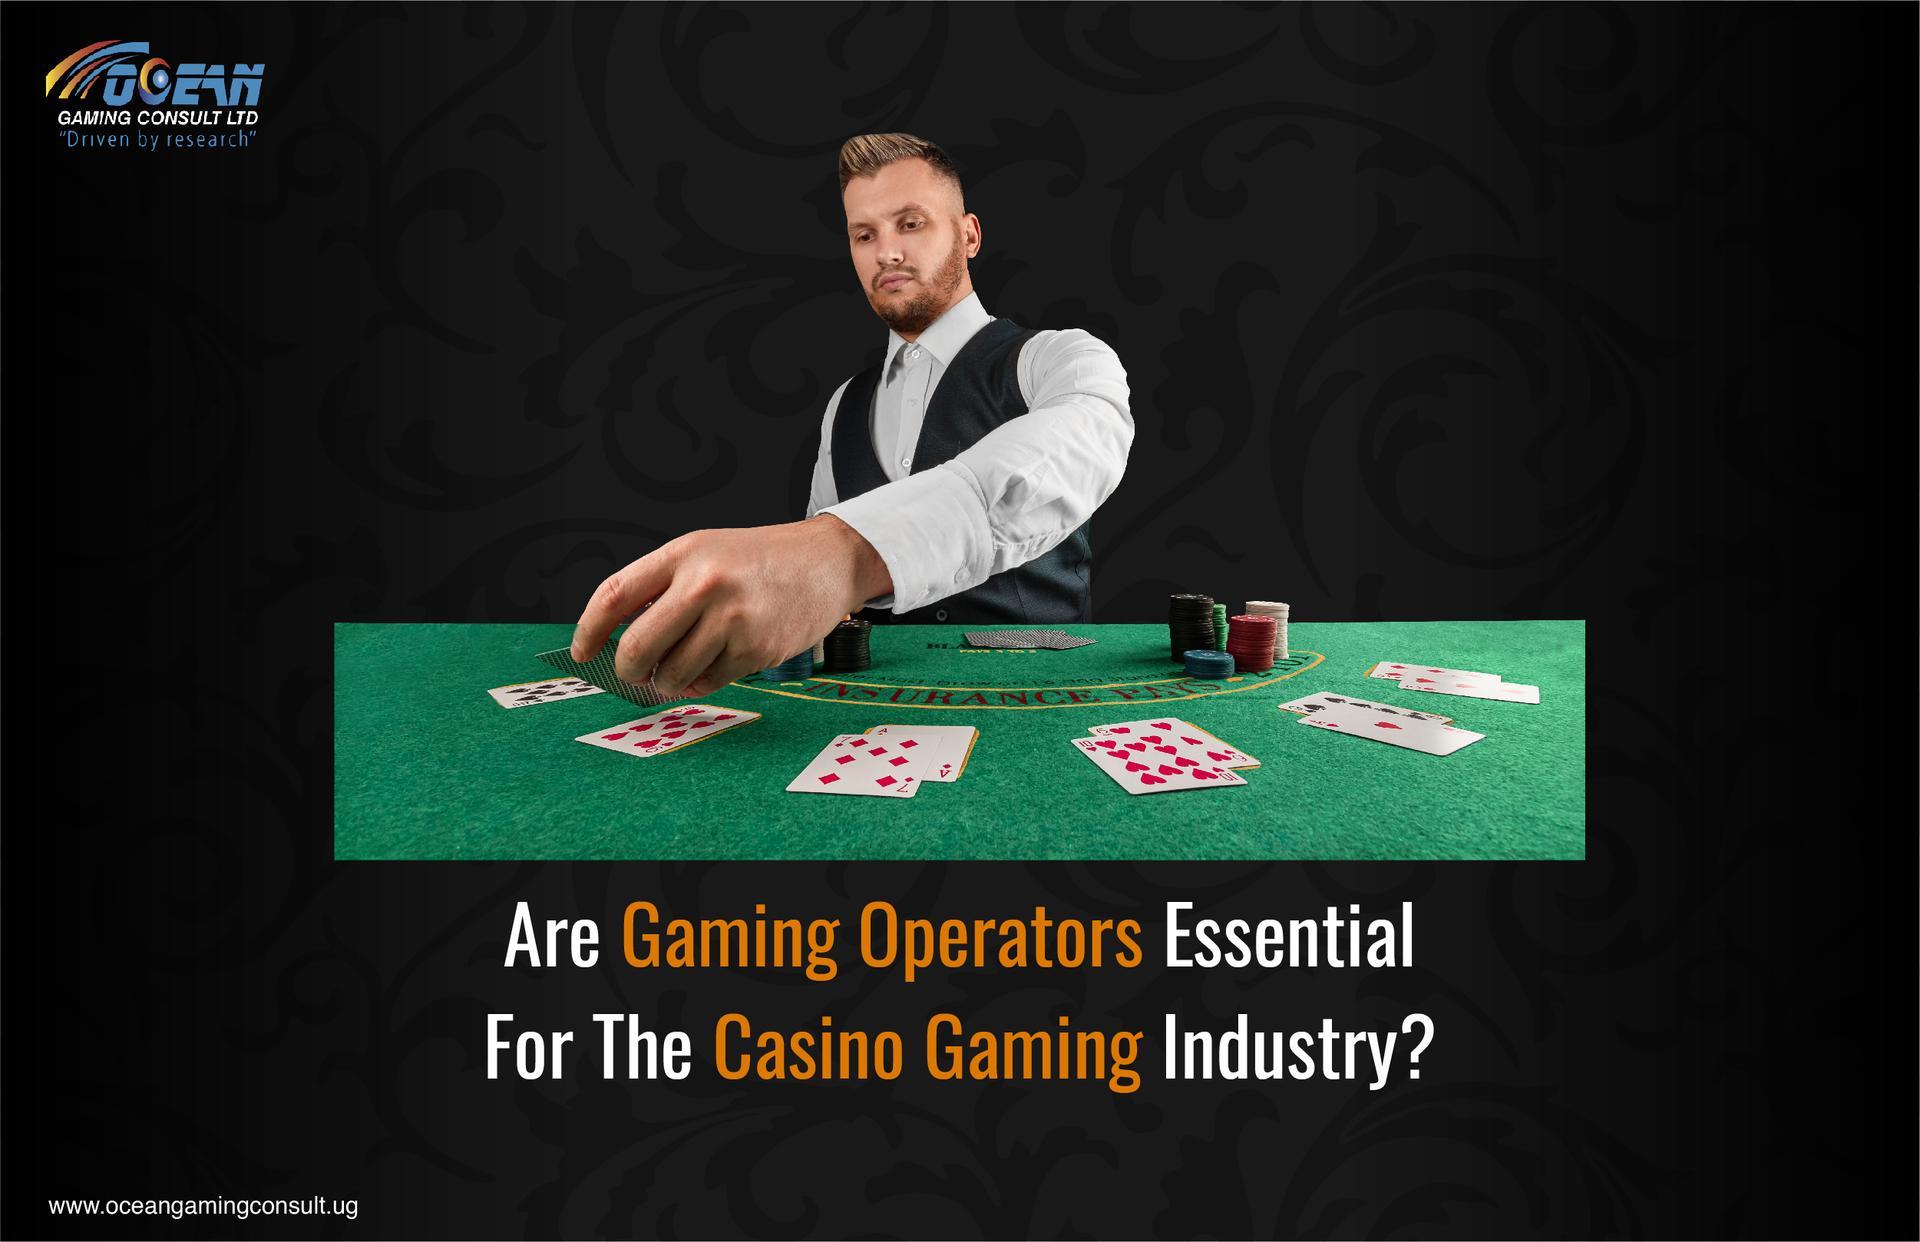 Are Gaming Operators Essential For The Casino Gaming Industry?